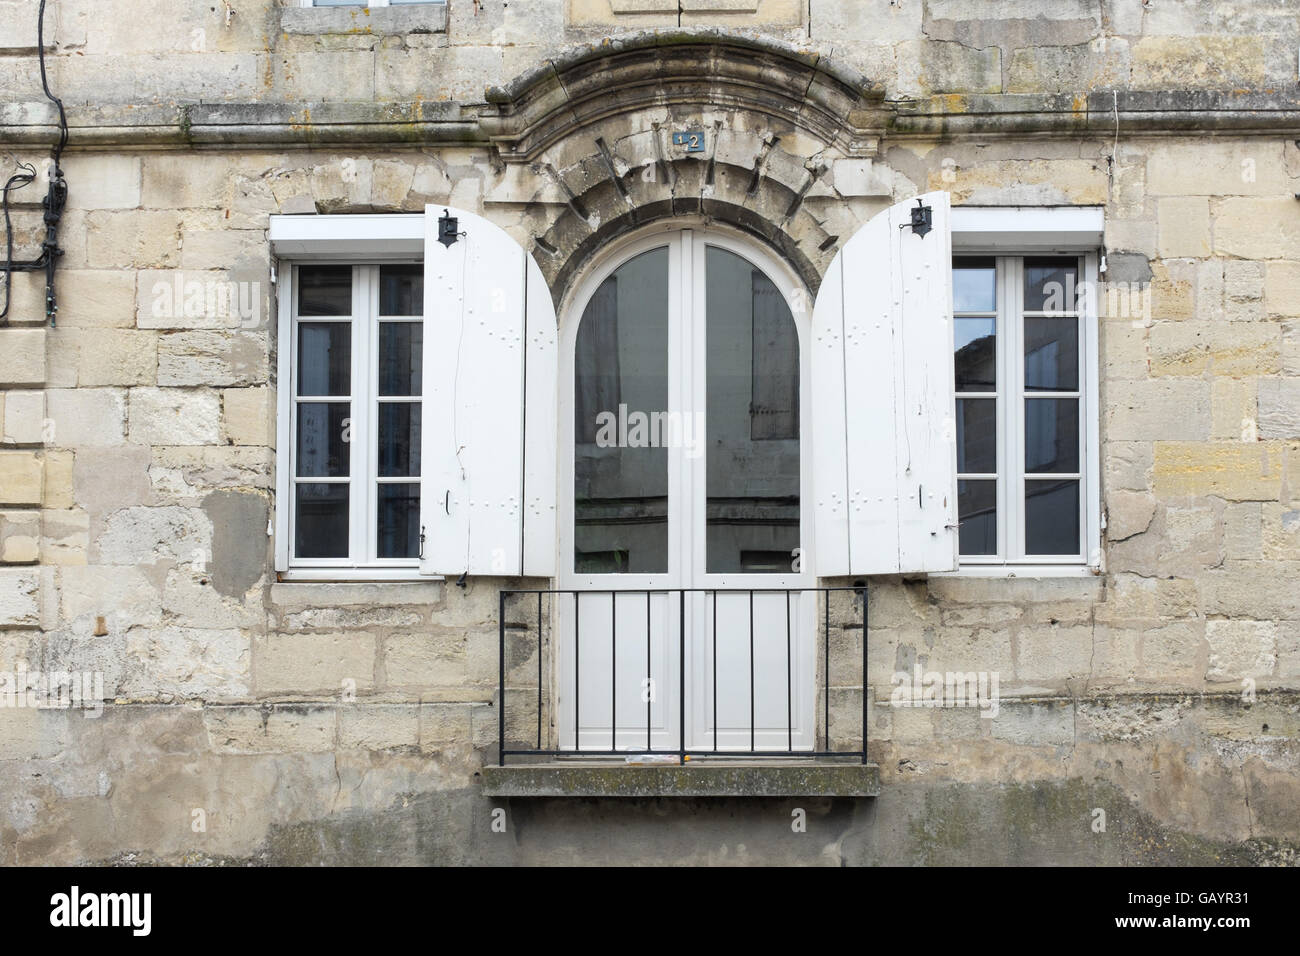 French windows with wooden shutters open and a balcony Stock Photo